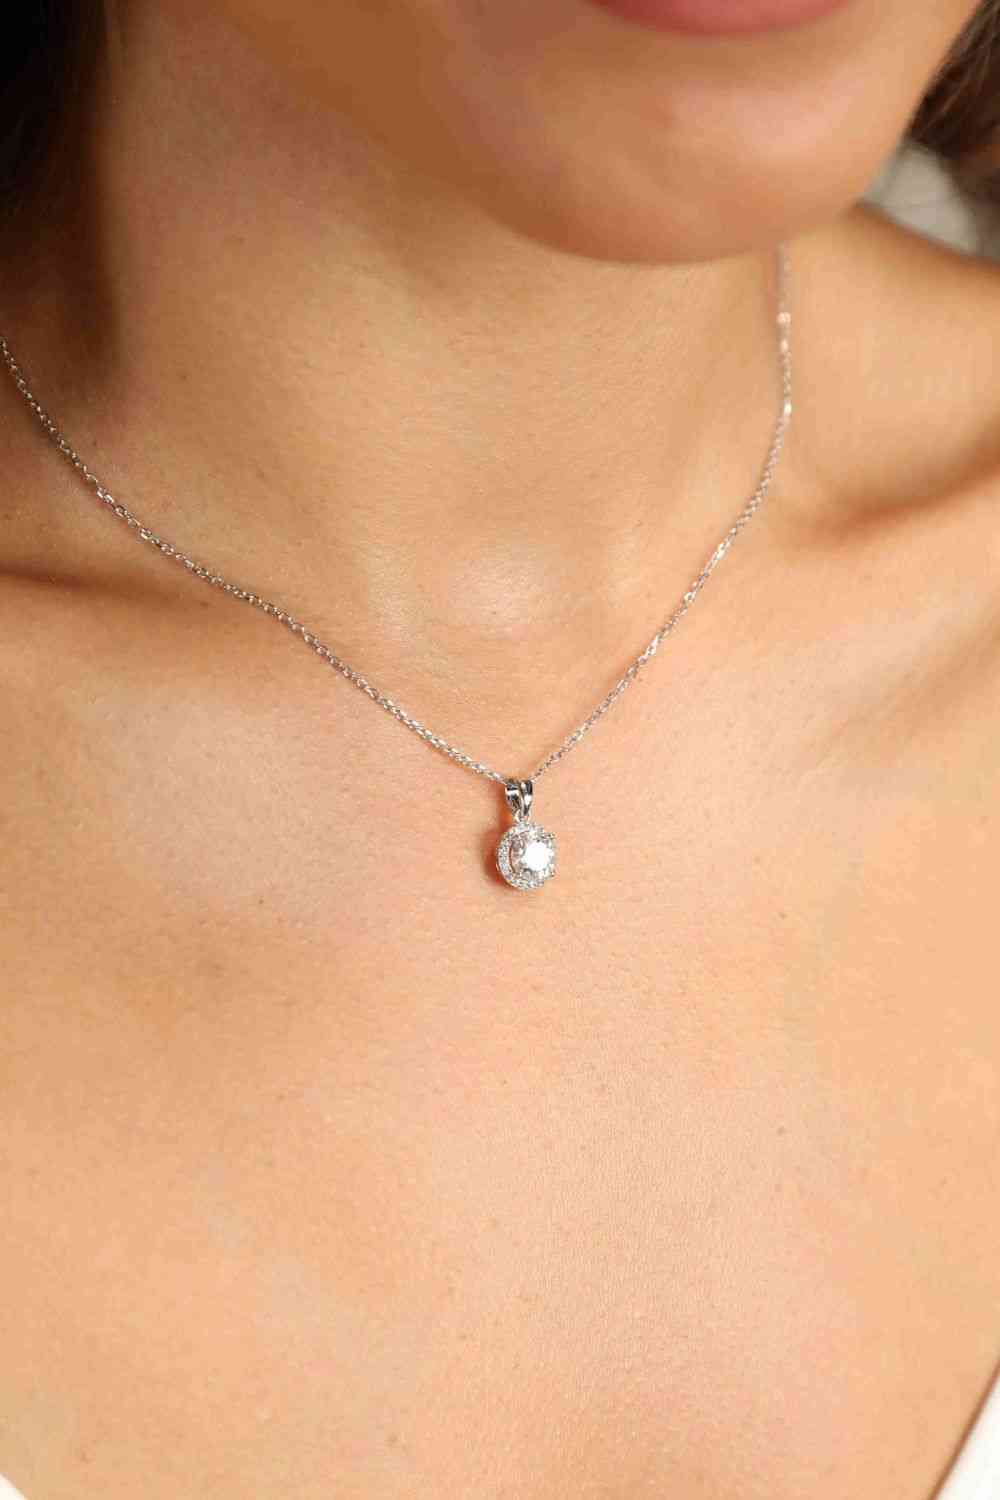 Adored Chance to Charm 1 Carat Moissanite Round Pendant Chain Necklace Silver One Size